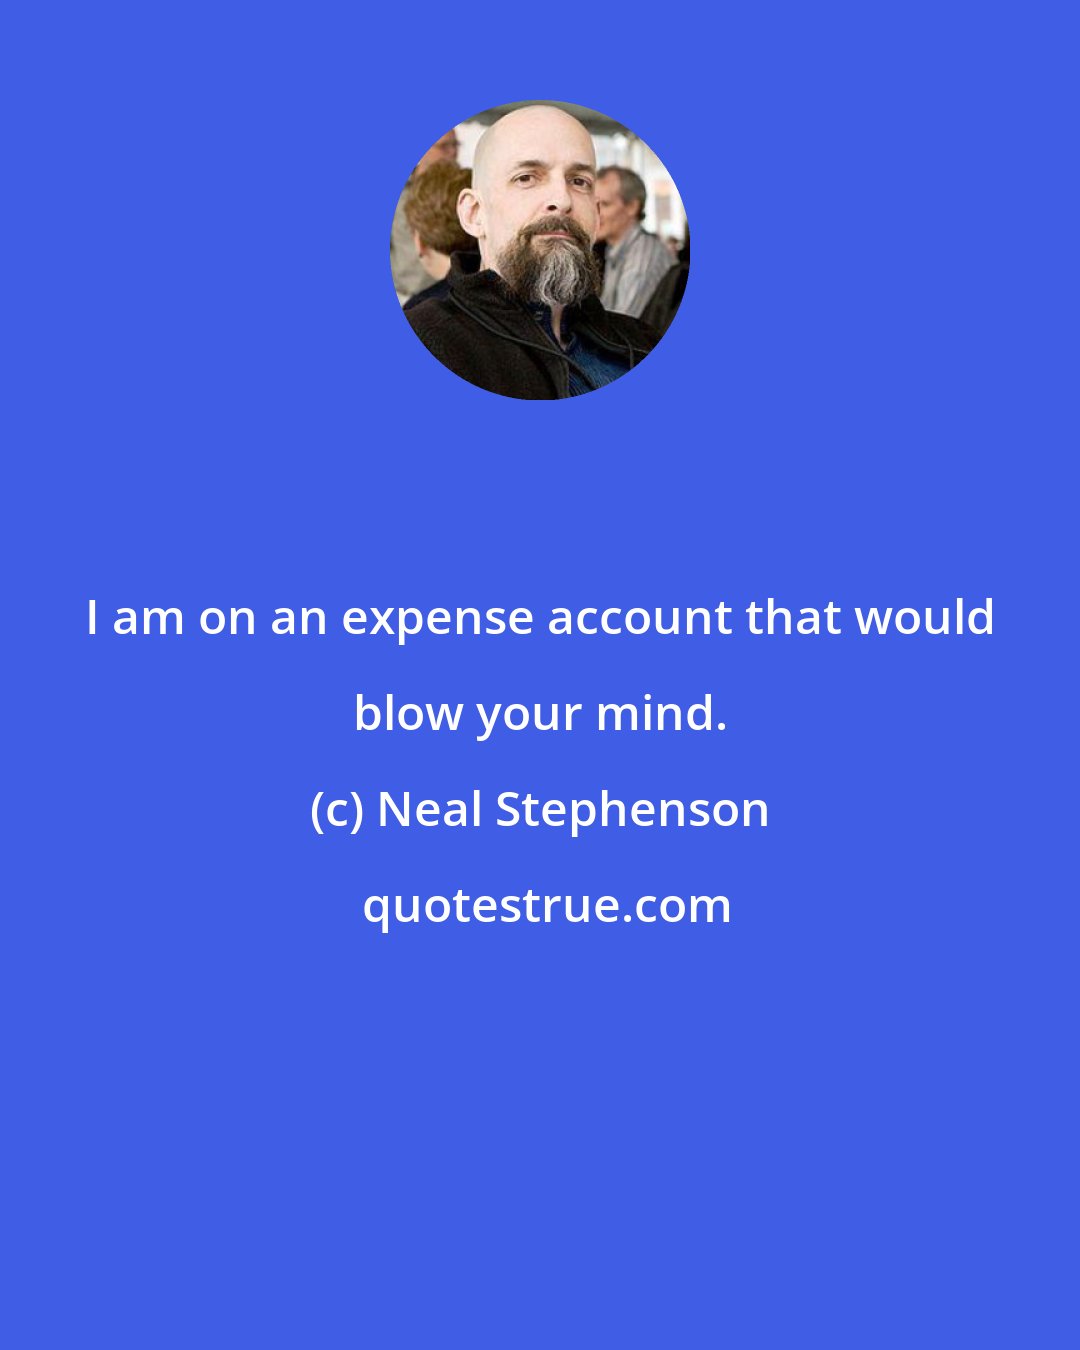 Neal Stephenson: I am on an expense account that would blow your mind.